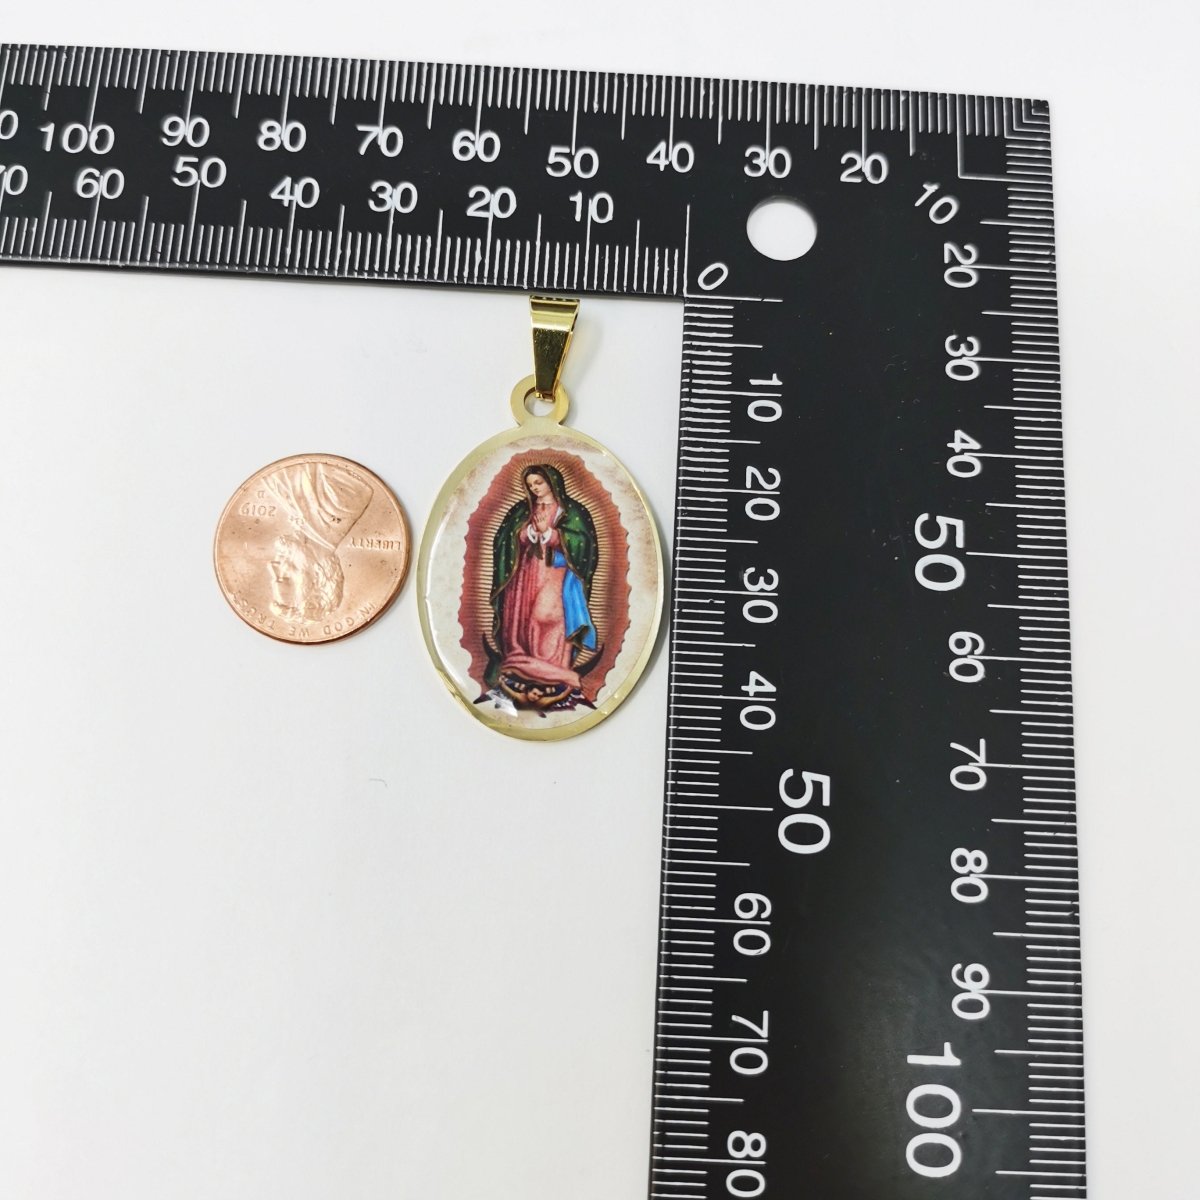 Gold Filled Oval Mother Mary charm, Lady Guadalupe Charm, Religious Necklace Pendant, Gold Religious Charm for Jewelry Making J-791 - DLUXCA